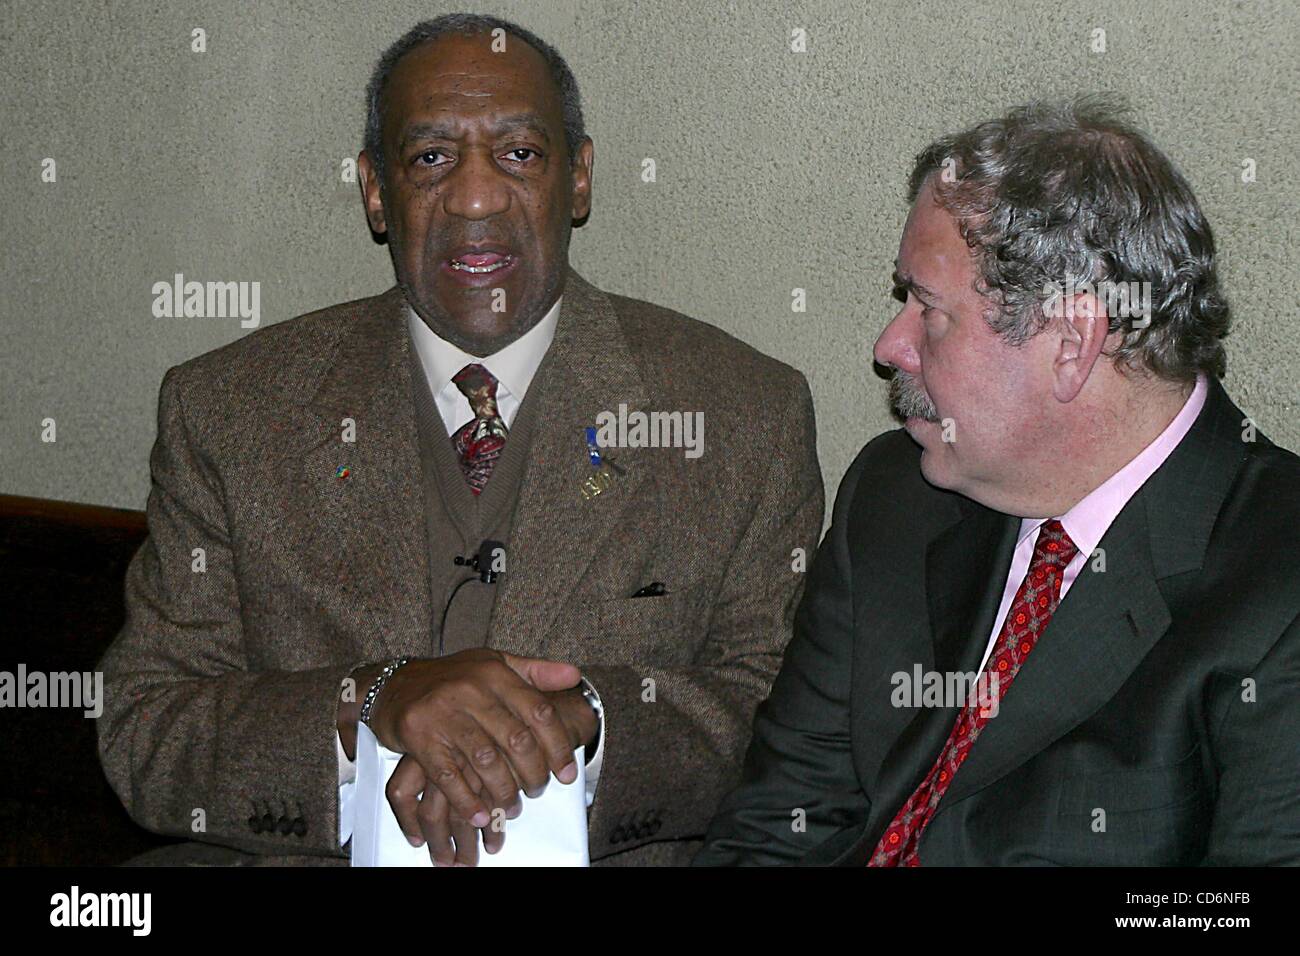 Feb. 2, 2004 - New York, New York, U.S. - K35226RM.''A CONVERSATION WITH COSBY'' TEACHERS COLLEGE AND REGION 10 COLLABERATIVE COMMEMORATION OF BROWN VS. TOPEKA BOARD OF EDUCATION SUPREME COURT DECISION , NEW YORK New York .02/02/2004.  /     2004..BILL COSBY AND ARTHUR LEVINE(Credit Image: Â© Rick M Stock Photo